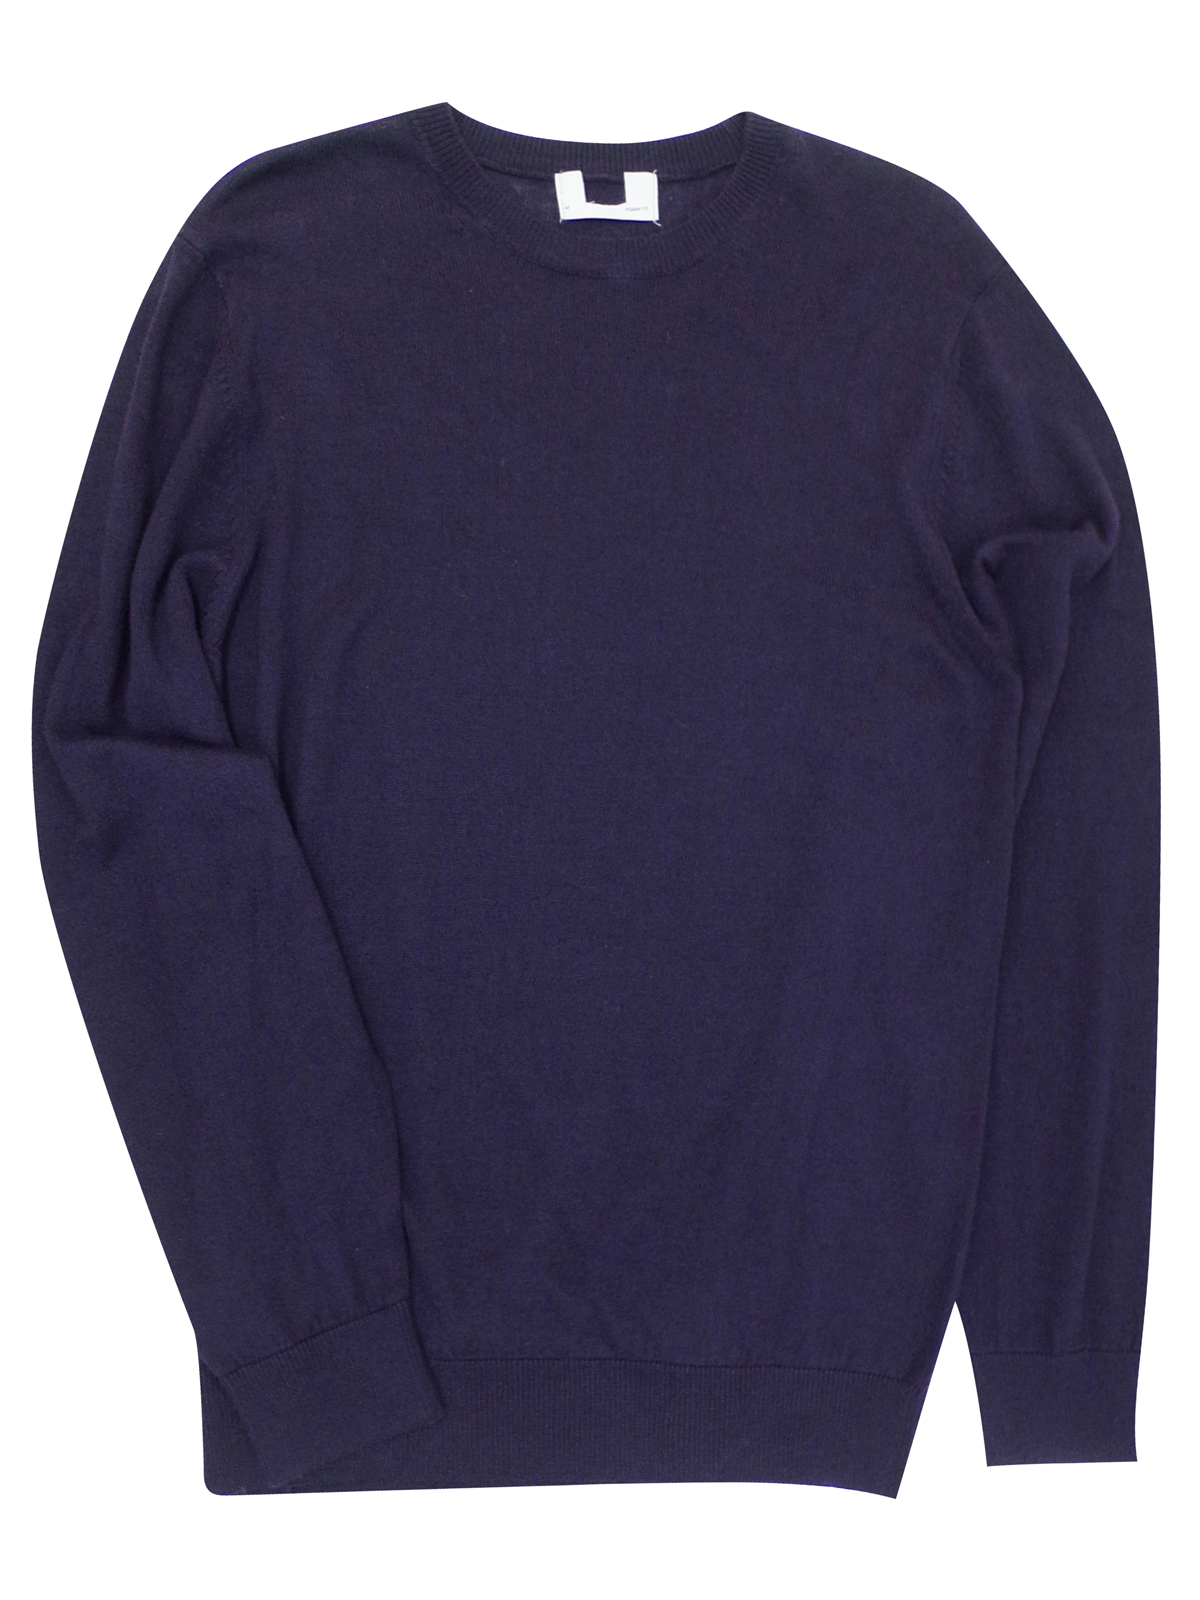 Marks and Spencer - - M&5 NAVY Crew Neck Jumper - Size Medium to Large